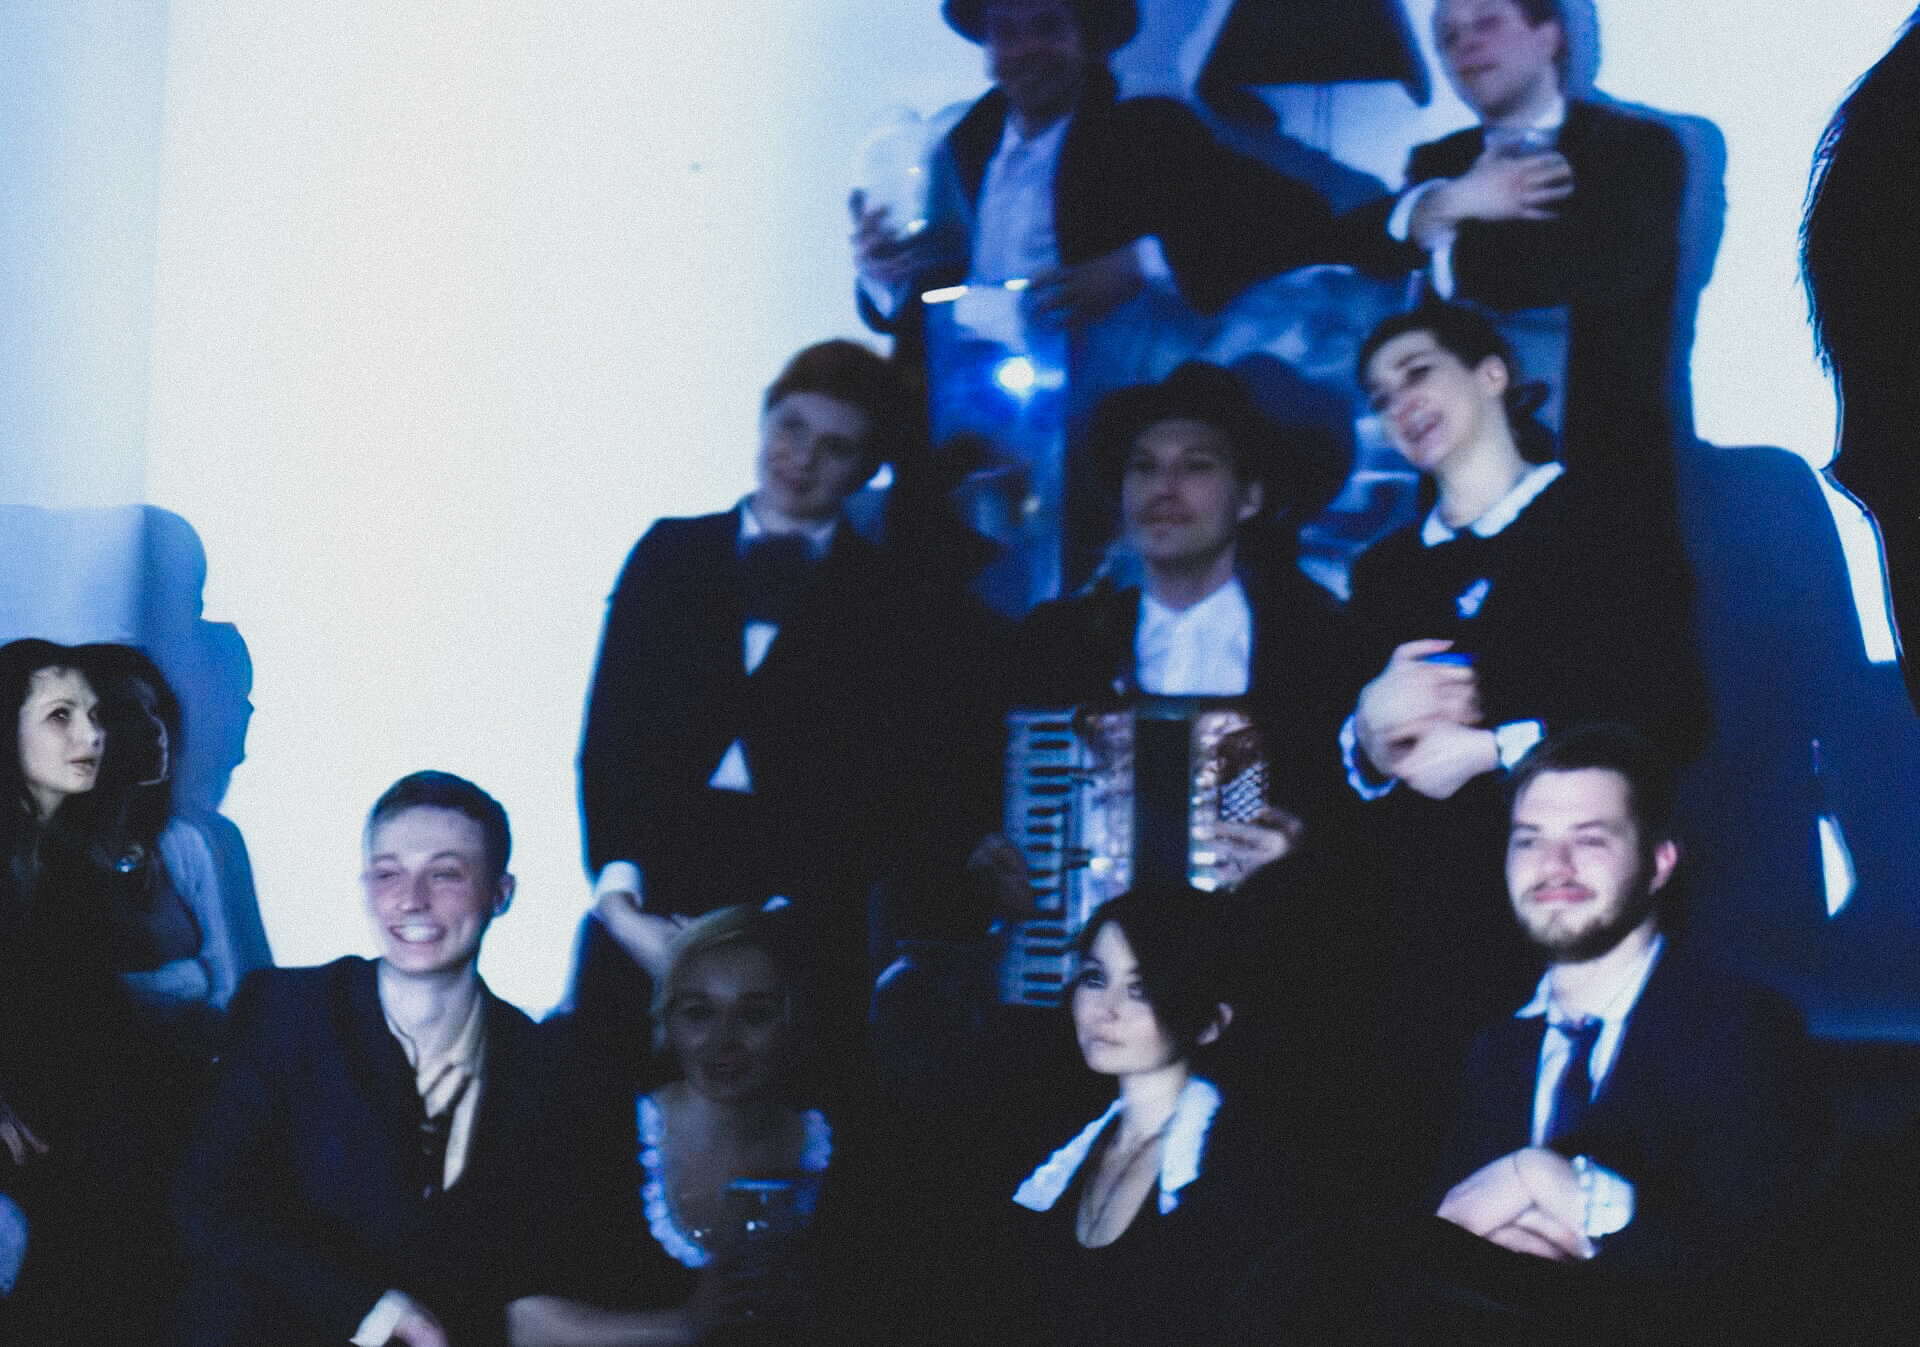 Blurry image of seven performers in black suits and dresses smiling and posing for photo. One is holding an accordion